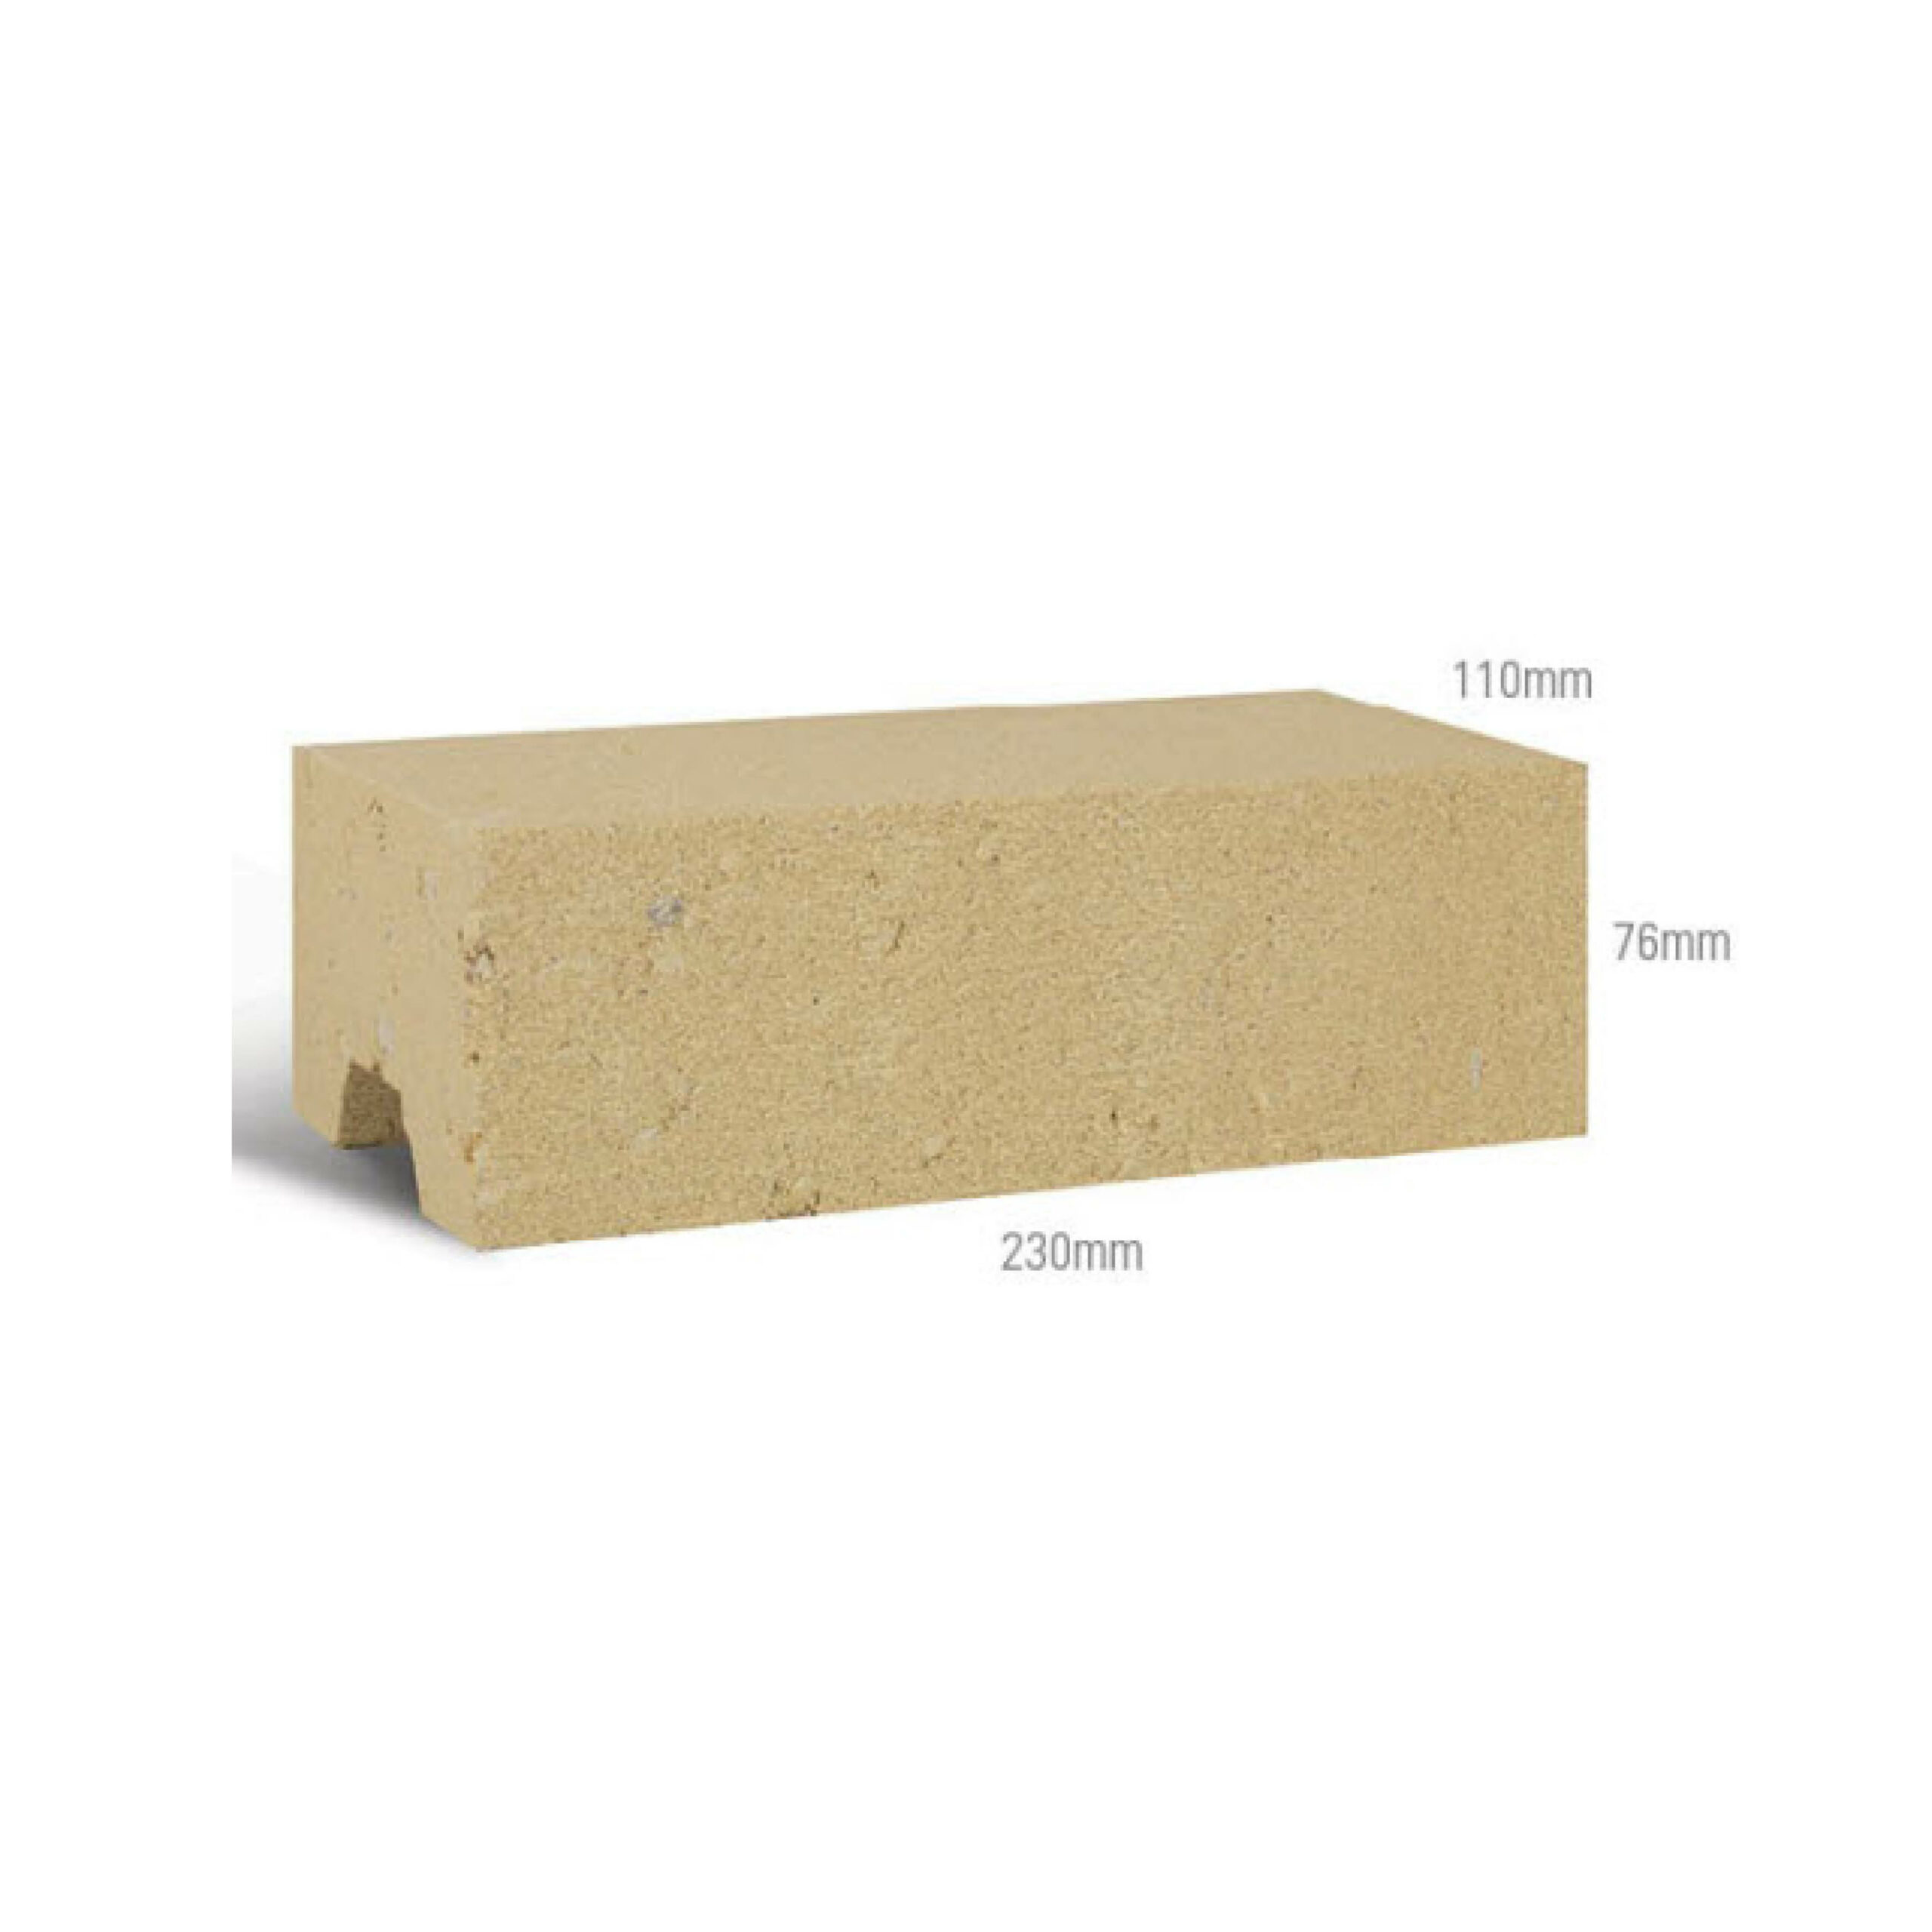 Architectural Brick - Oatmeal